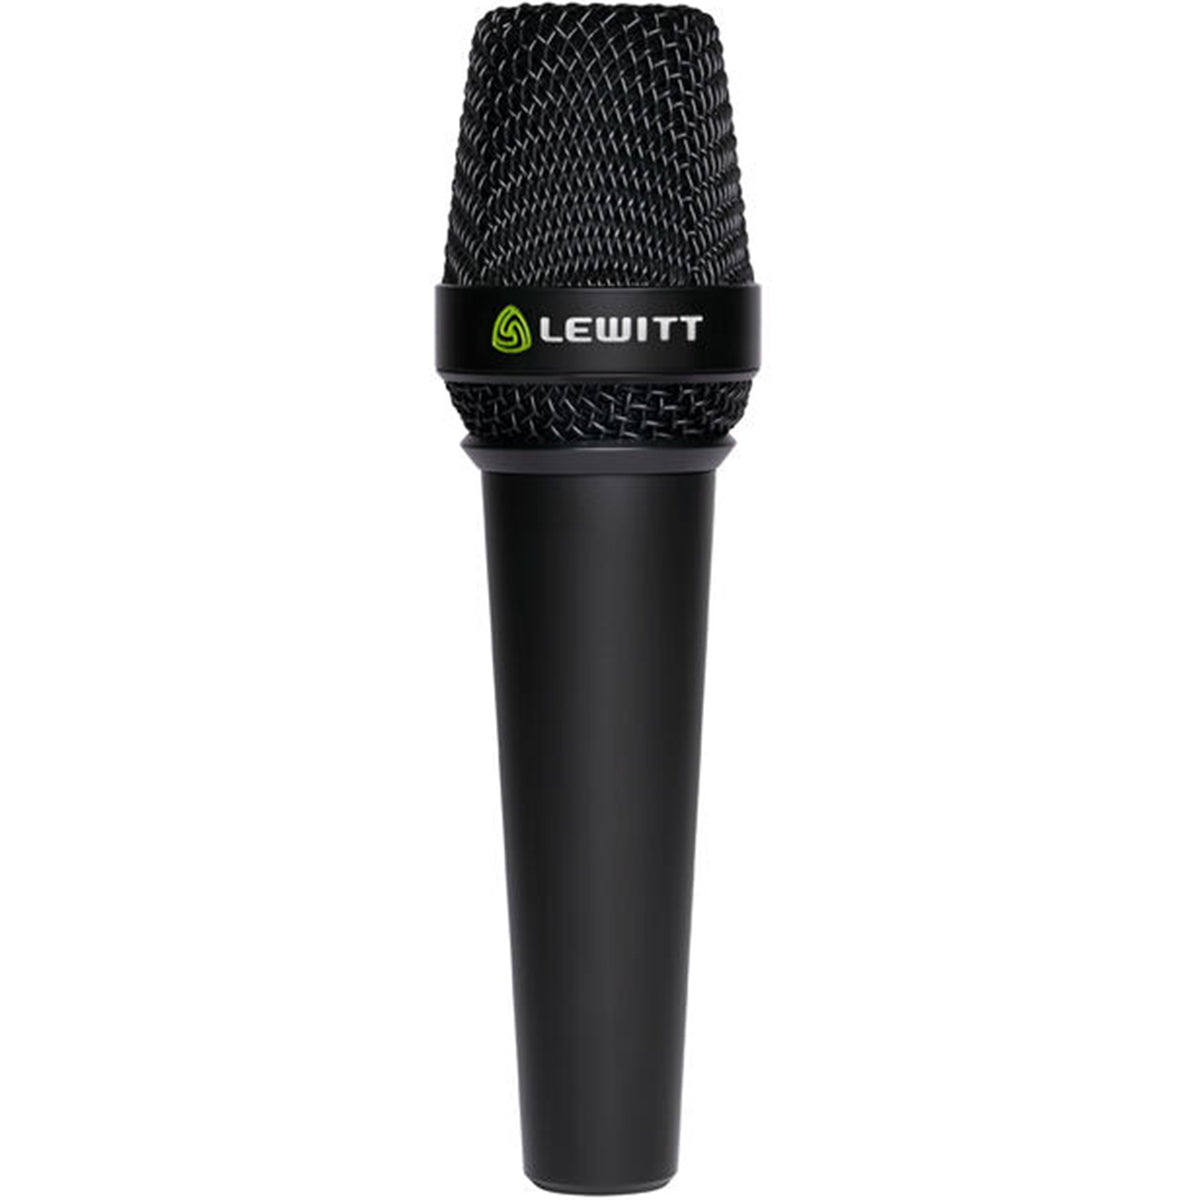 Lewitt Audio MTP 50 Microphone Handle with XLR Output for W9 Black